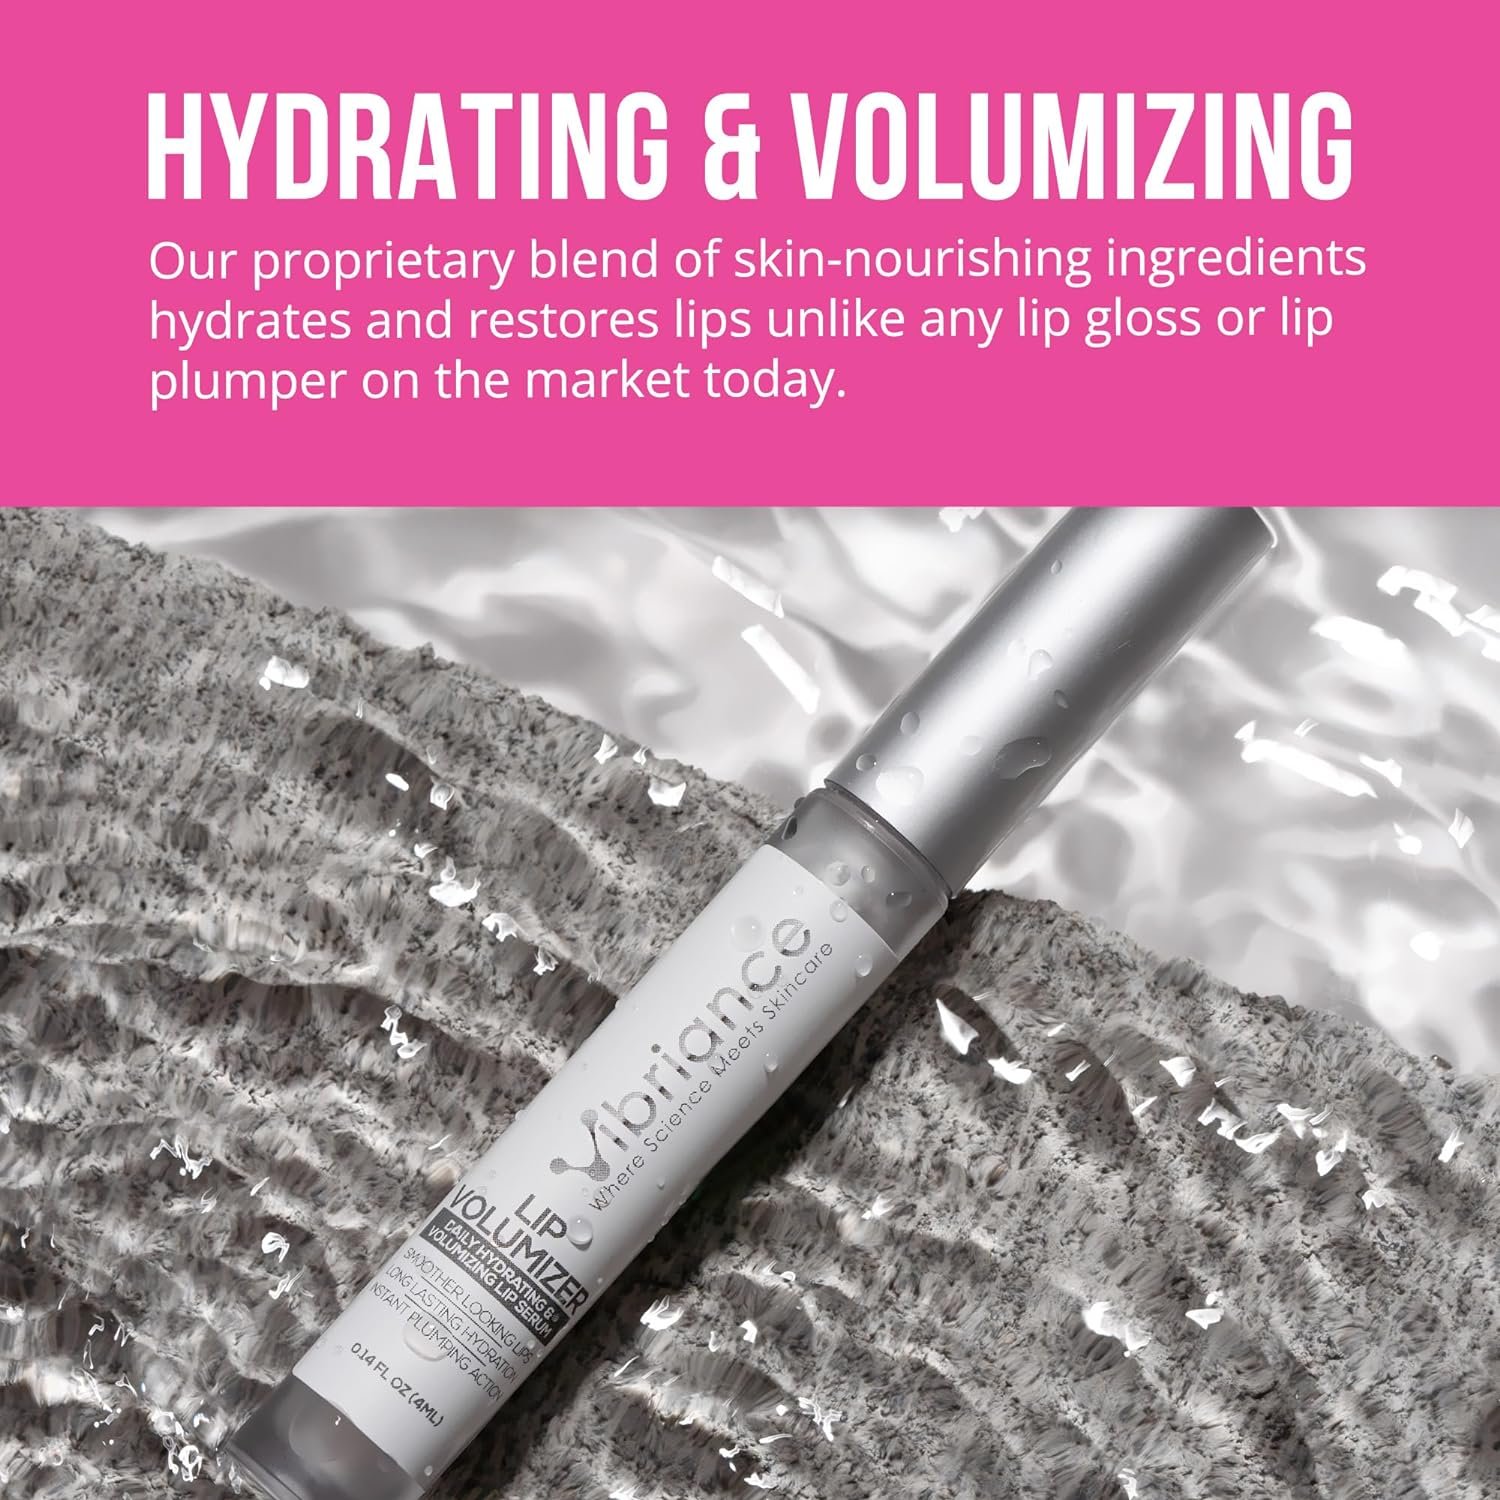 Vibriance Hydrating Lip Volumizer, Restoring and Volumizing, Smooths Lip Lines and Wrinkles. Instant Plumping Action | 0.14 fl oz (4 ml)